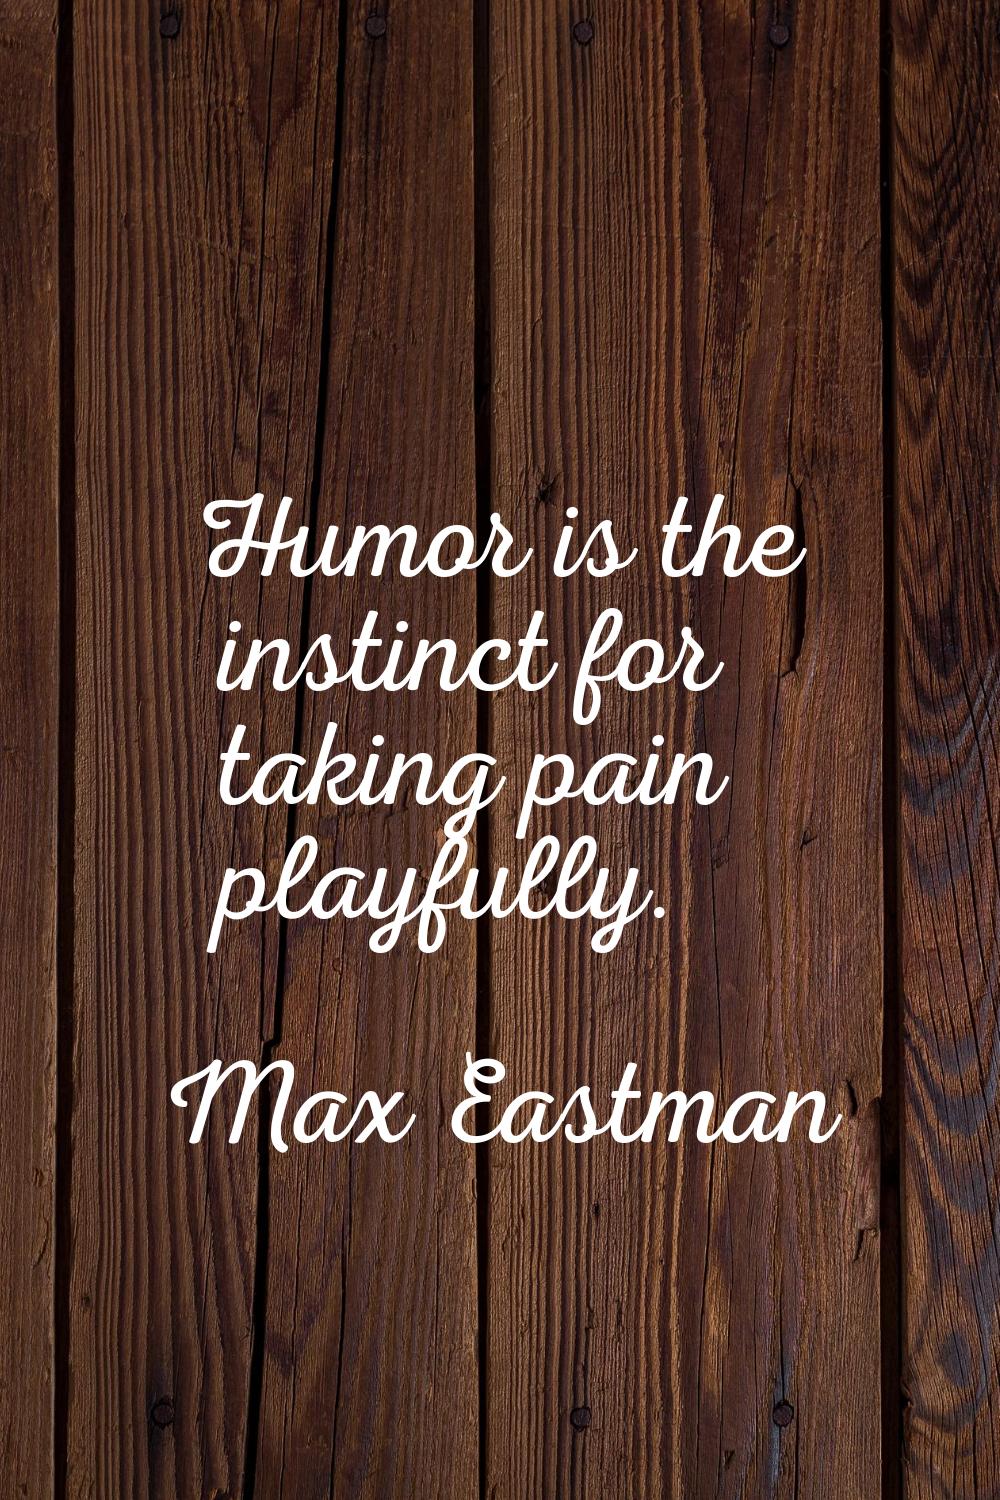 Humor is the instinct for taking pain playfully.